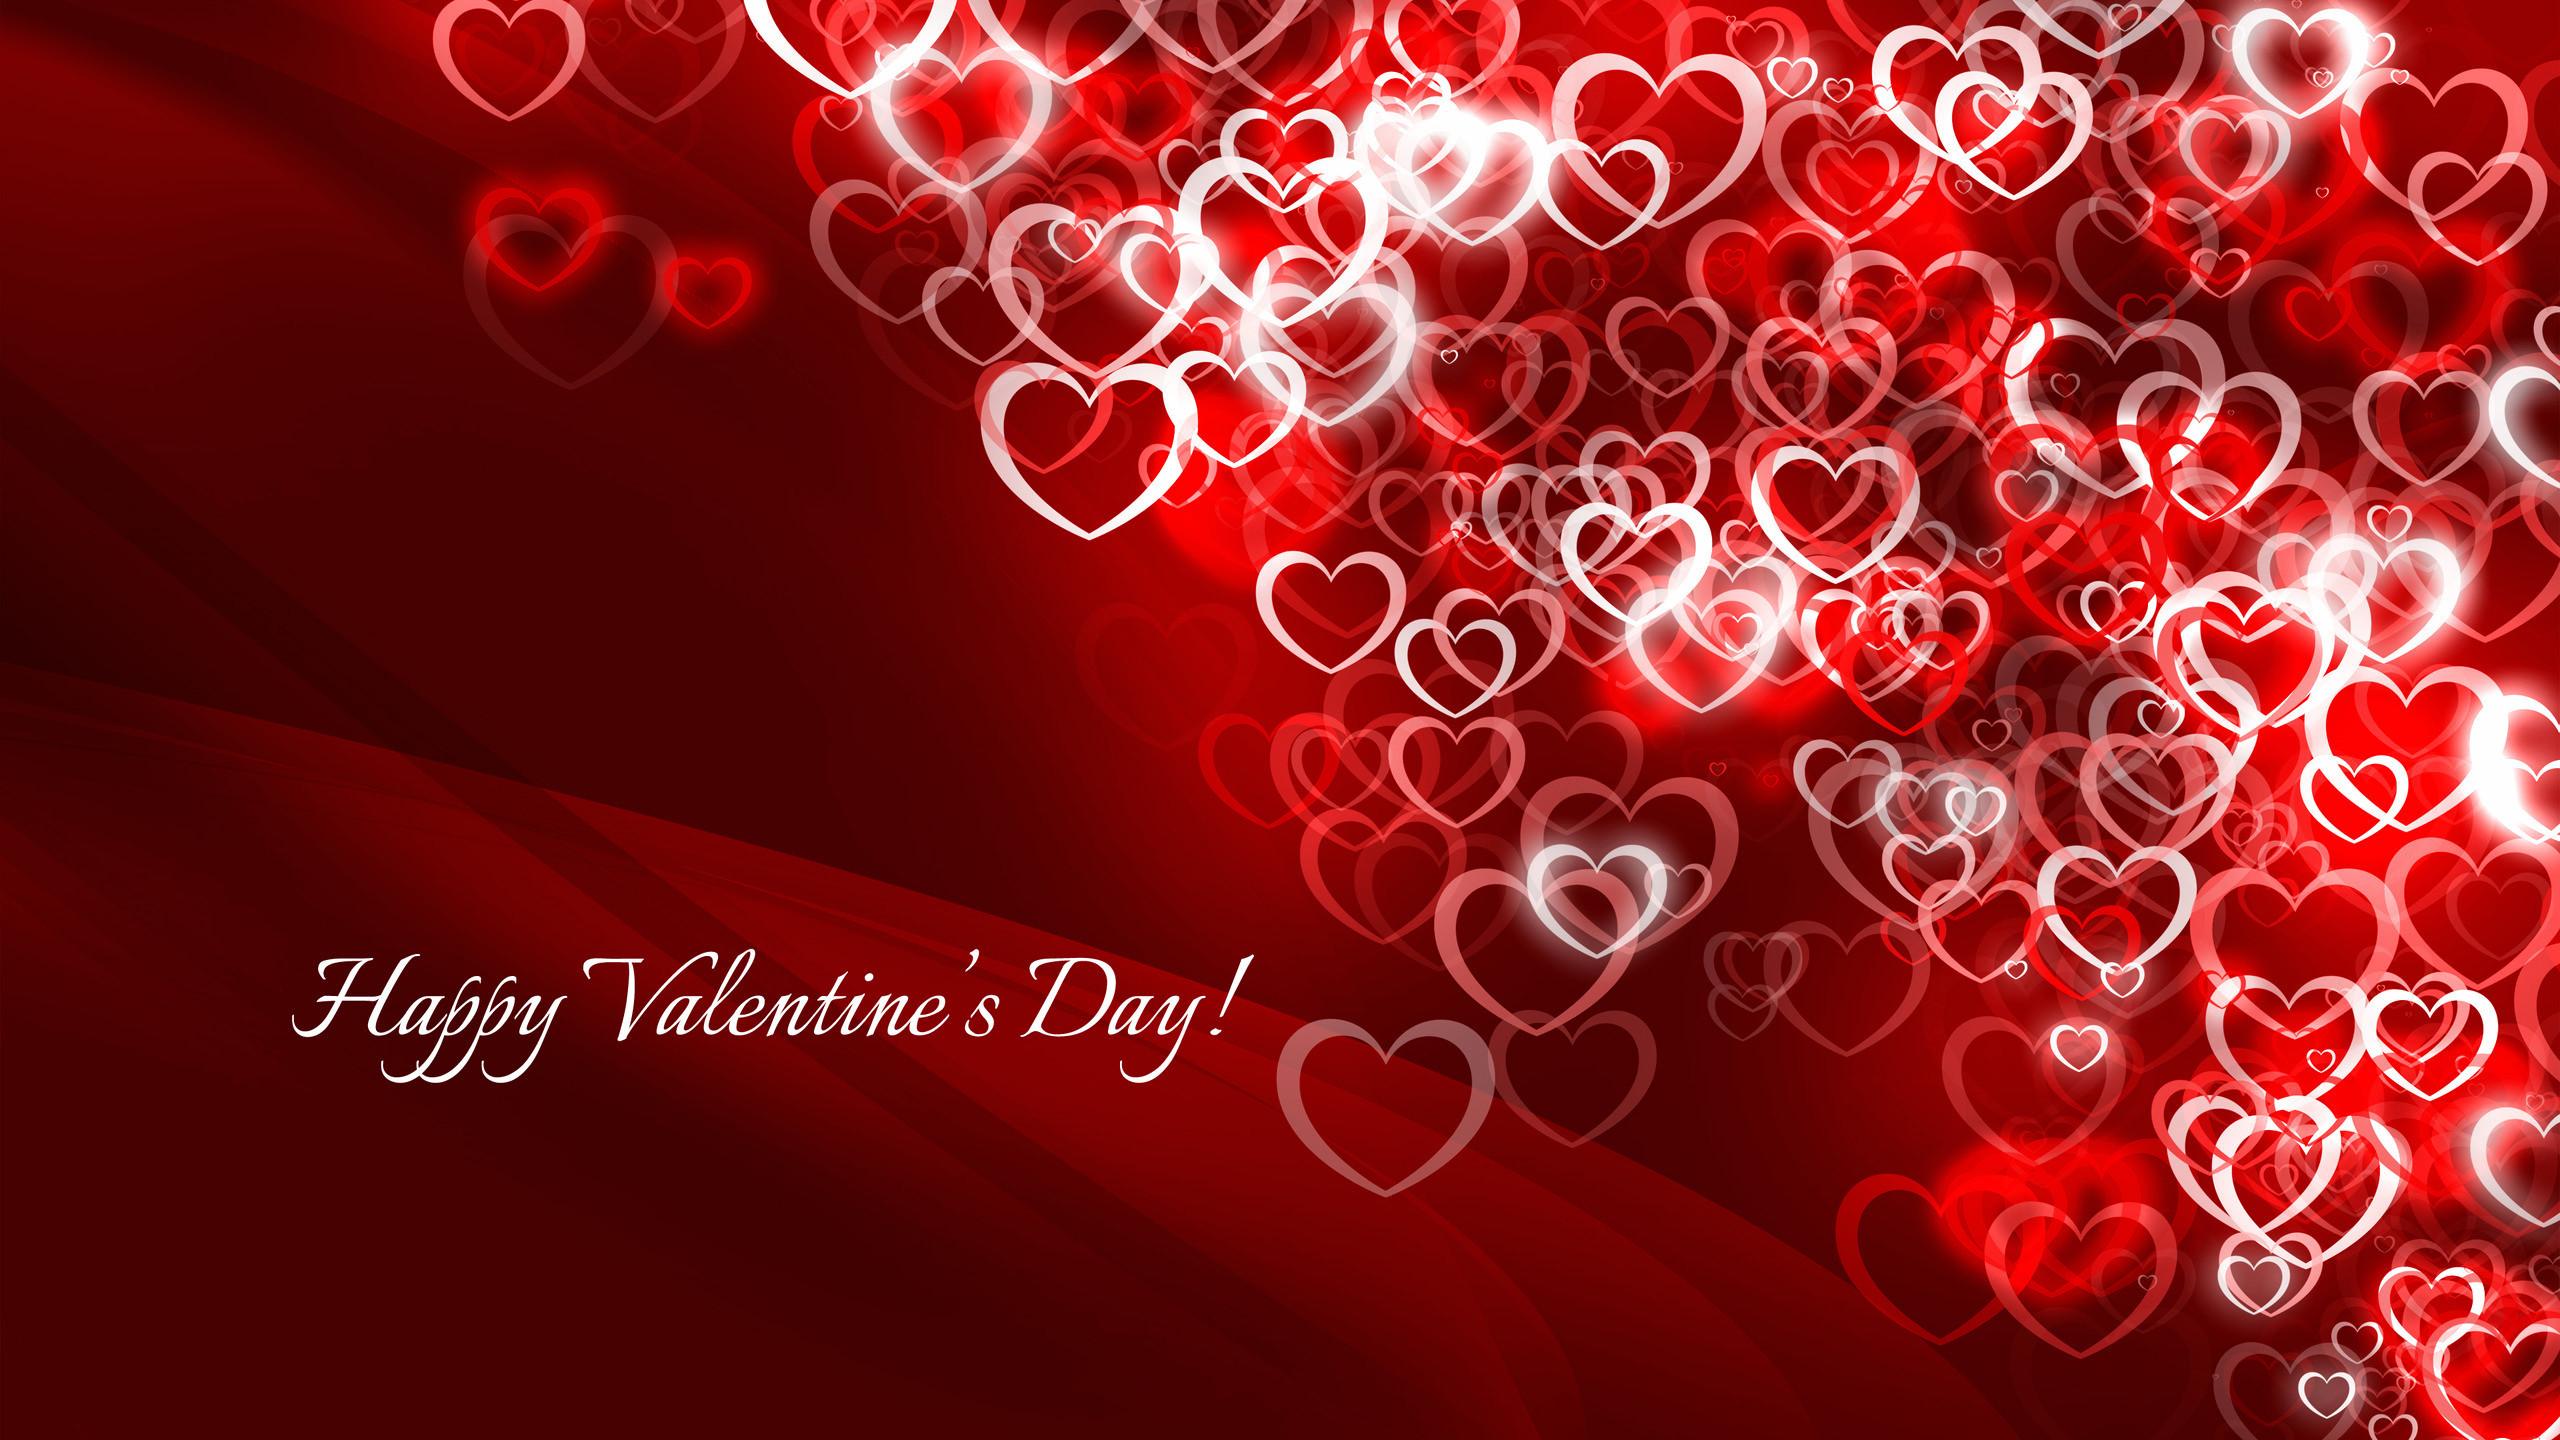 Animated Valentines Screensaver Wallpapers - Wallpaper Cave